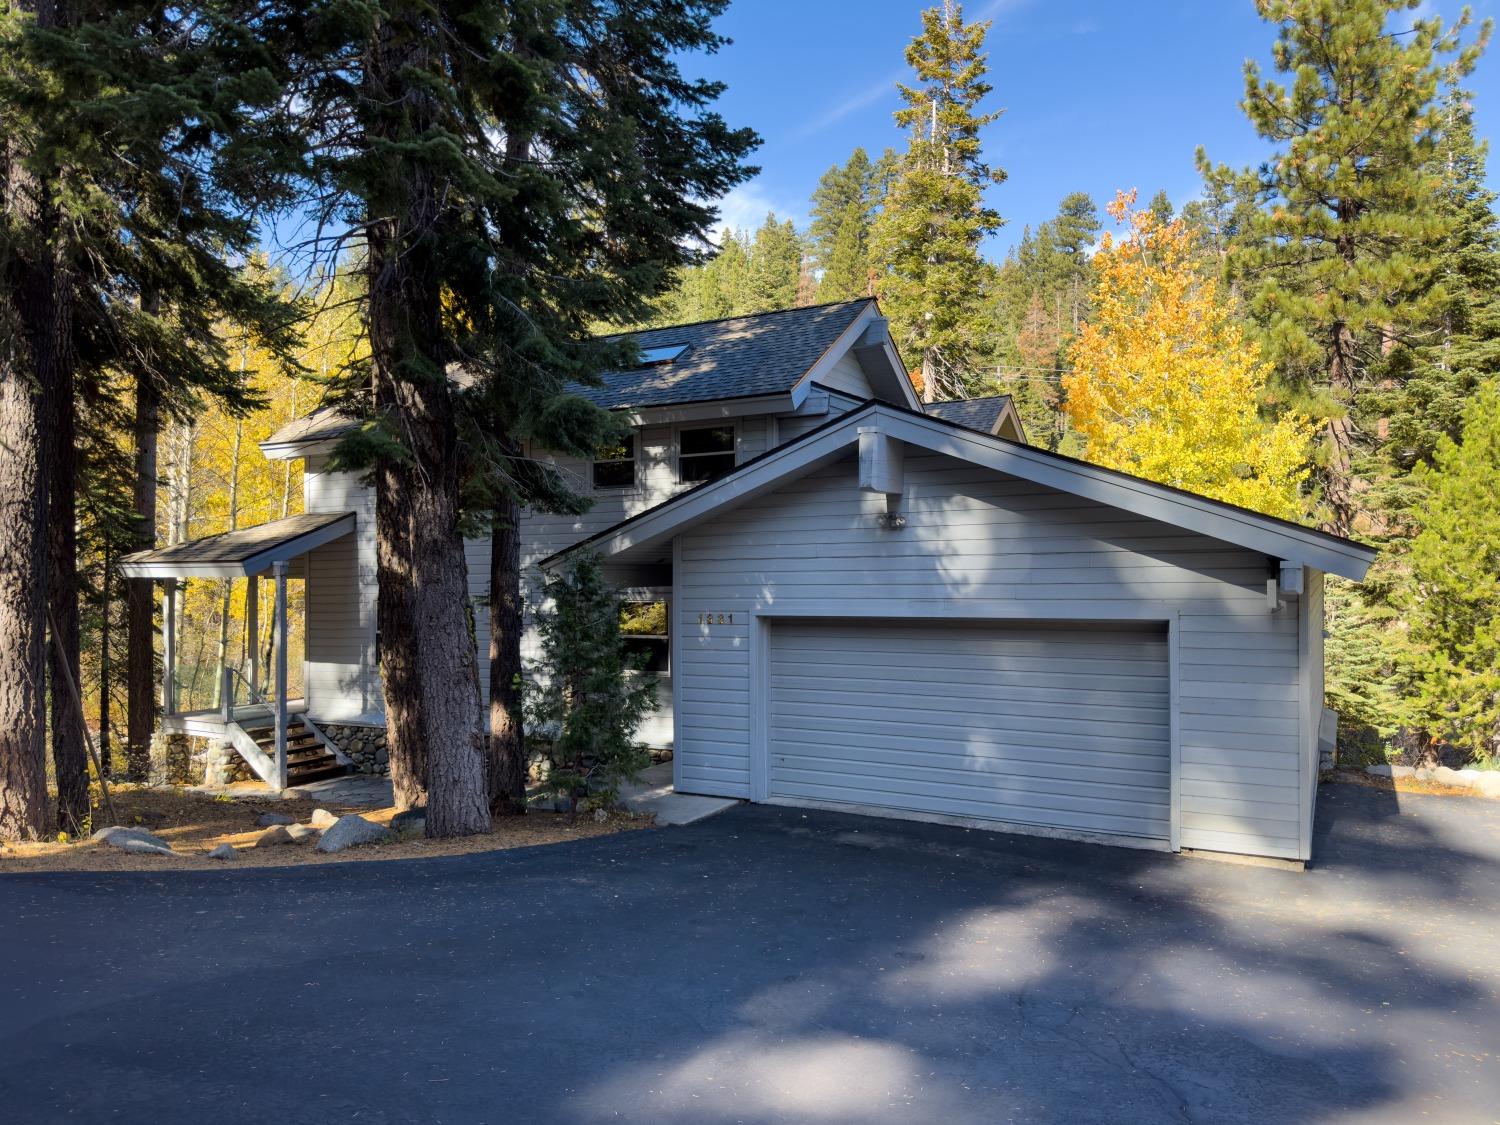 Photo of 1331 Mineral Springs Pl in Alpine Meadows, CA